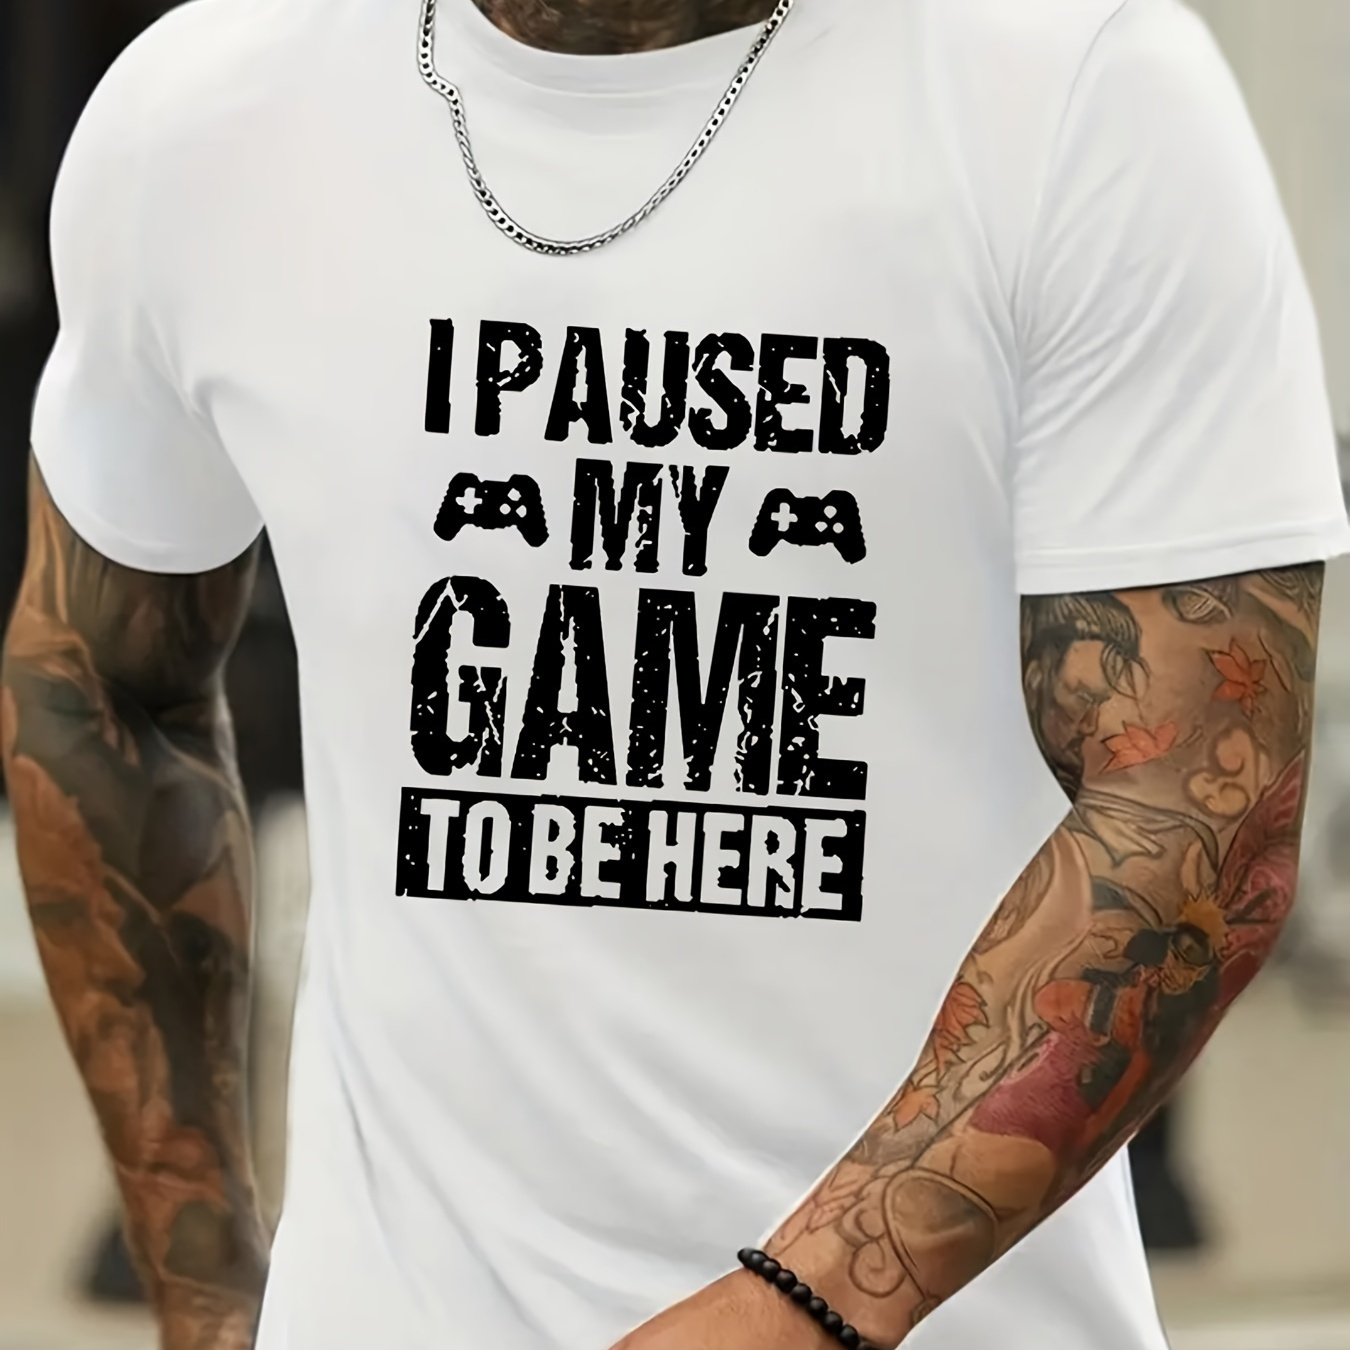 

I Pasued My Game To Be Here And Anime Gamepad Graphic Print, Men's Novel Graphic Design T-shirt, Casual Comfy Tees For Summer, Men's Clothing Tops For Daily Activities